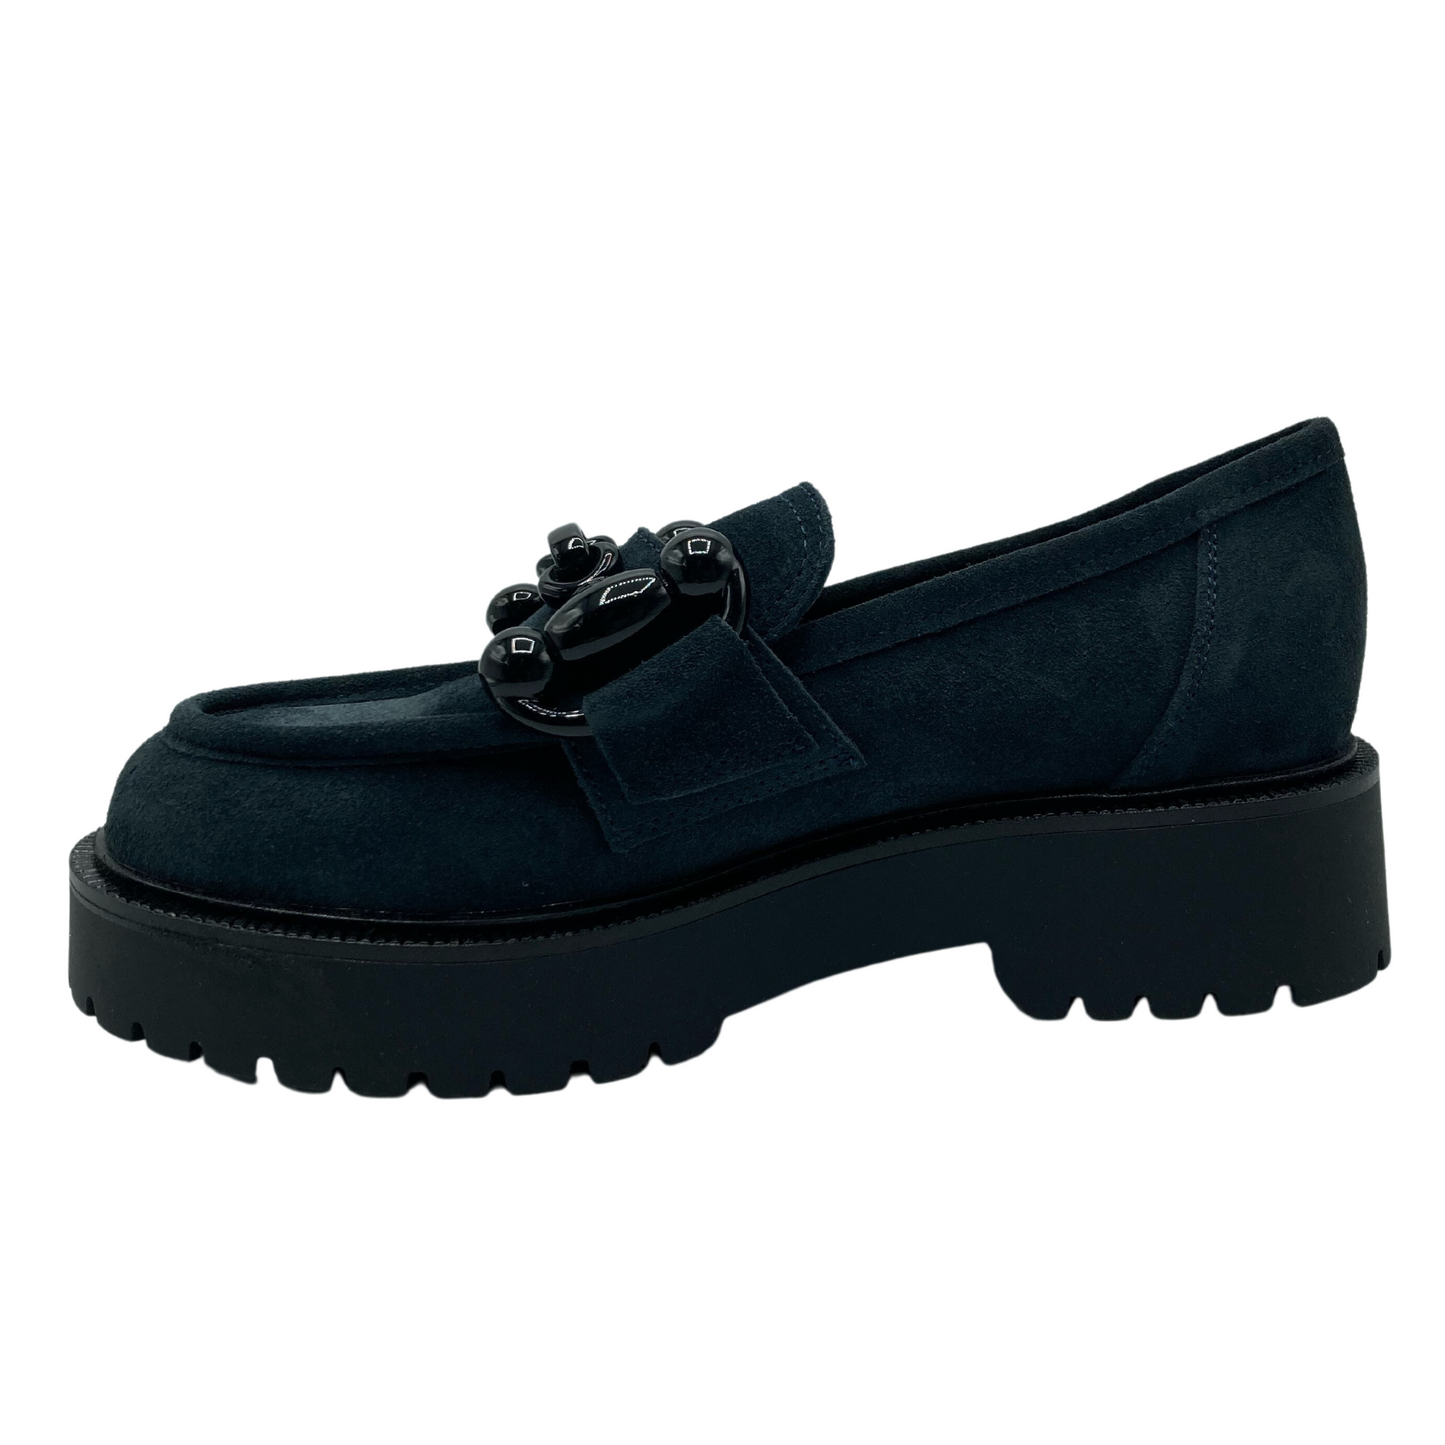 Left facing view of navy suede loafer with black buckle detail on upper and black lug sole